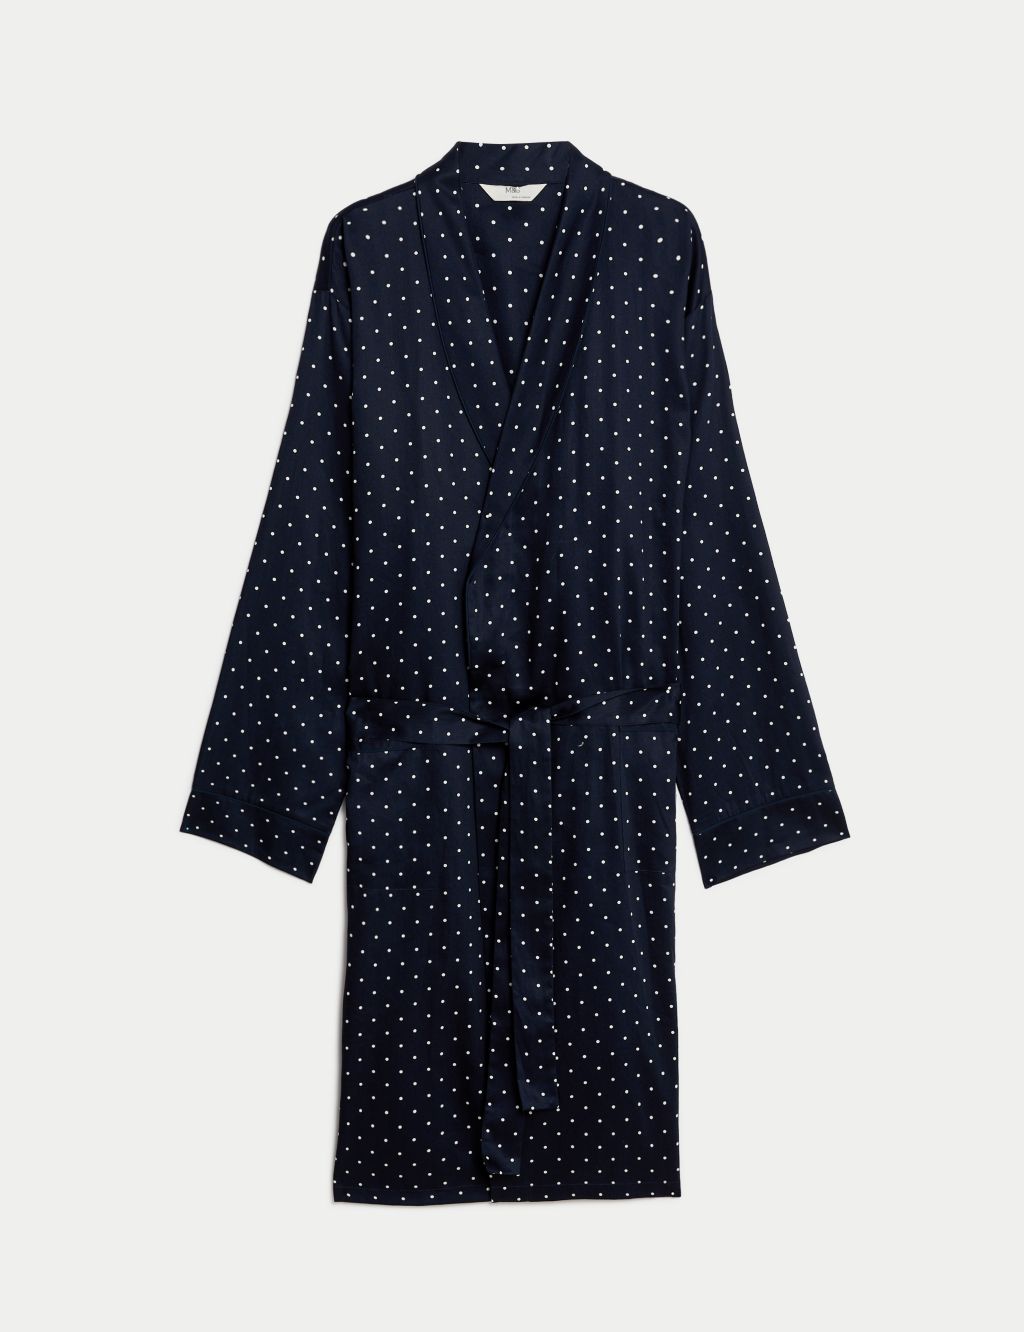 Pure Cotton Polka Dot Dressing Gown image 2